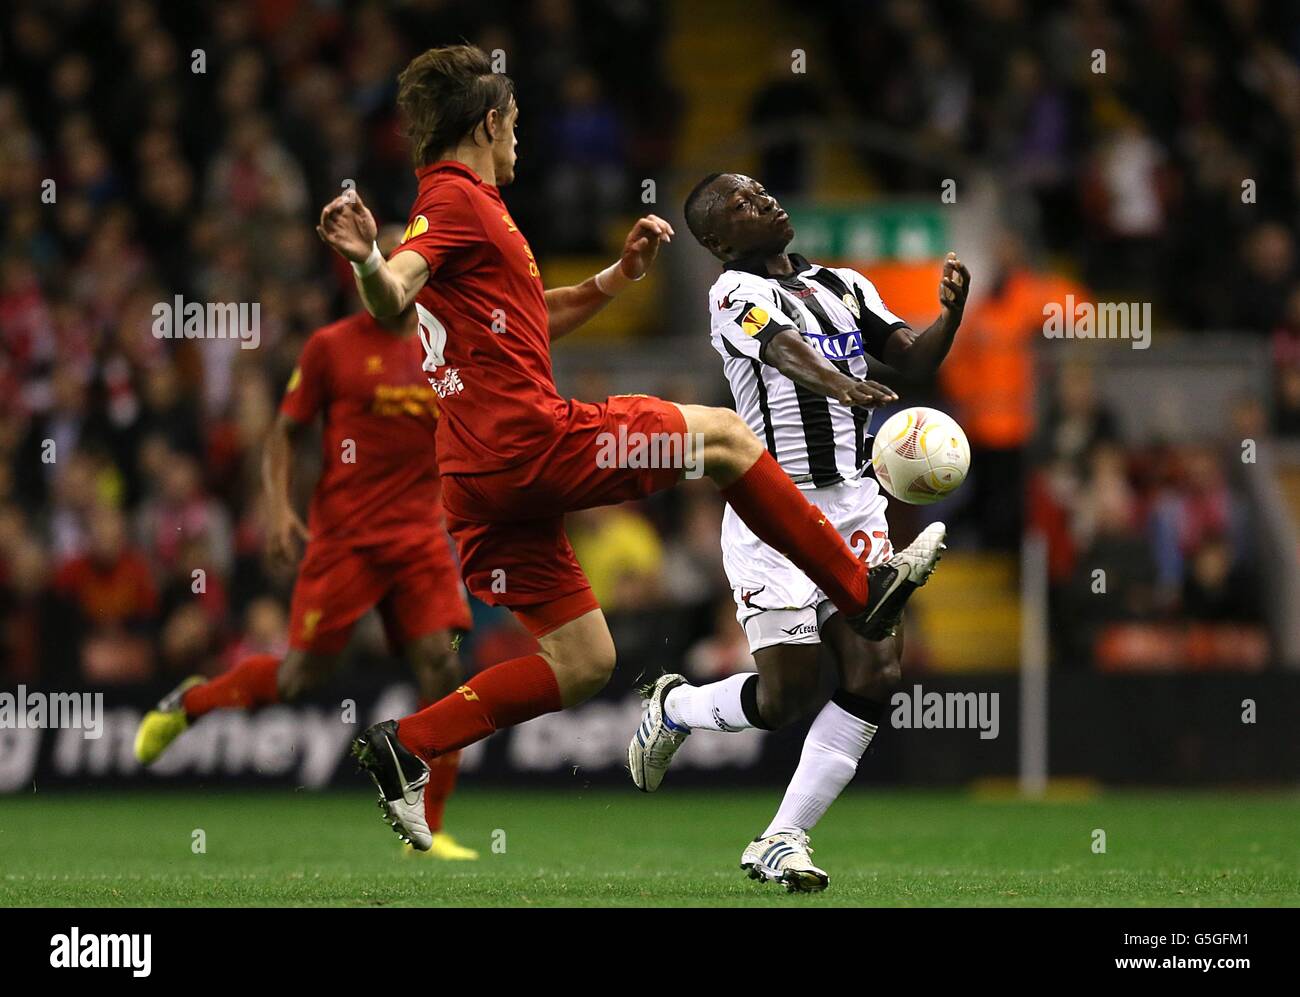 Soccer - UEFA Europa League - Group A - Liverpool v Udinese - Anfield Stock Photo